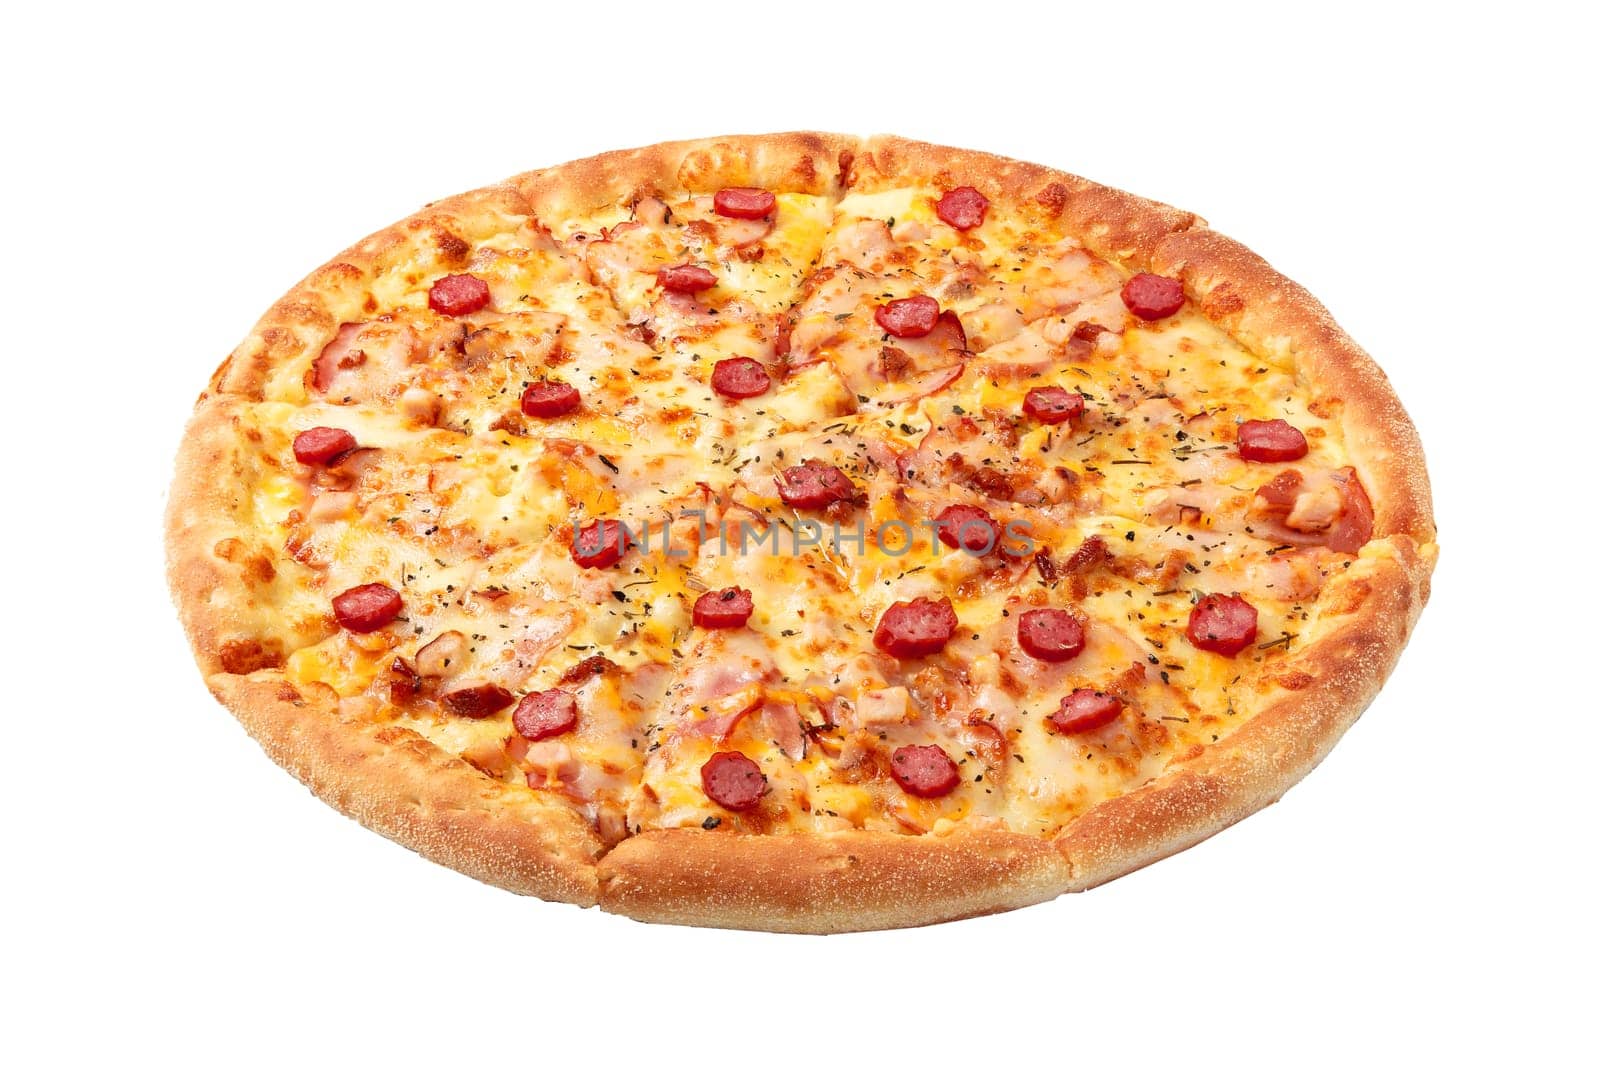 Delicious classic italian Pizza with sausages, bacon, pepper and cheese mozzarella. Fresh italian classic original pizza isolated on white background.